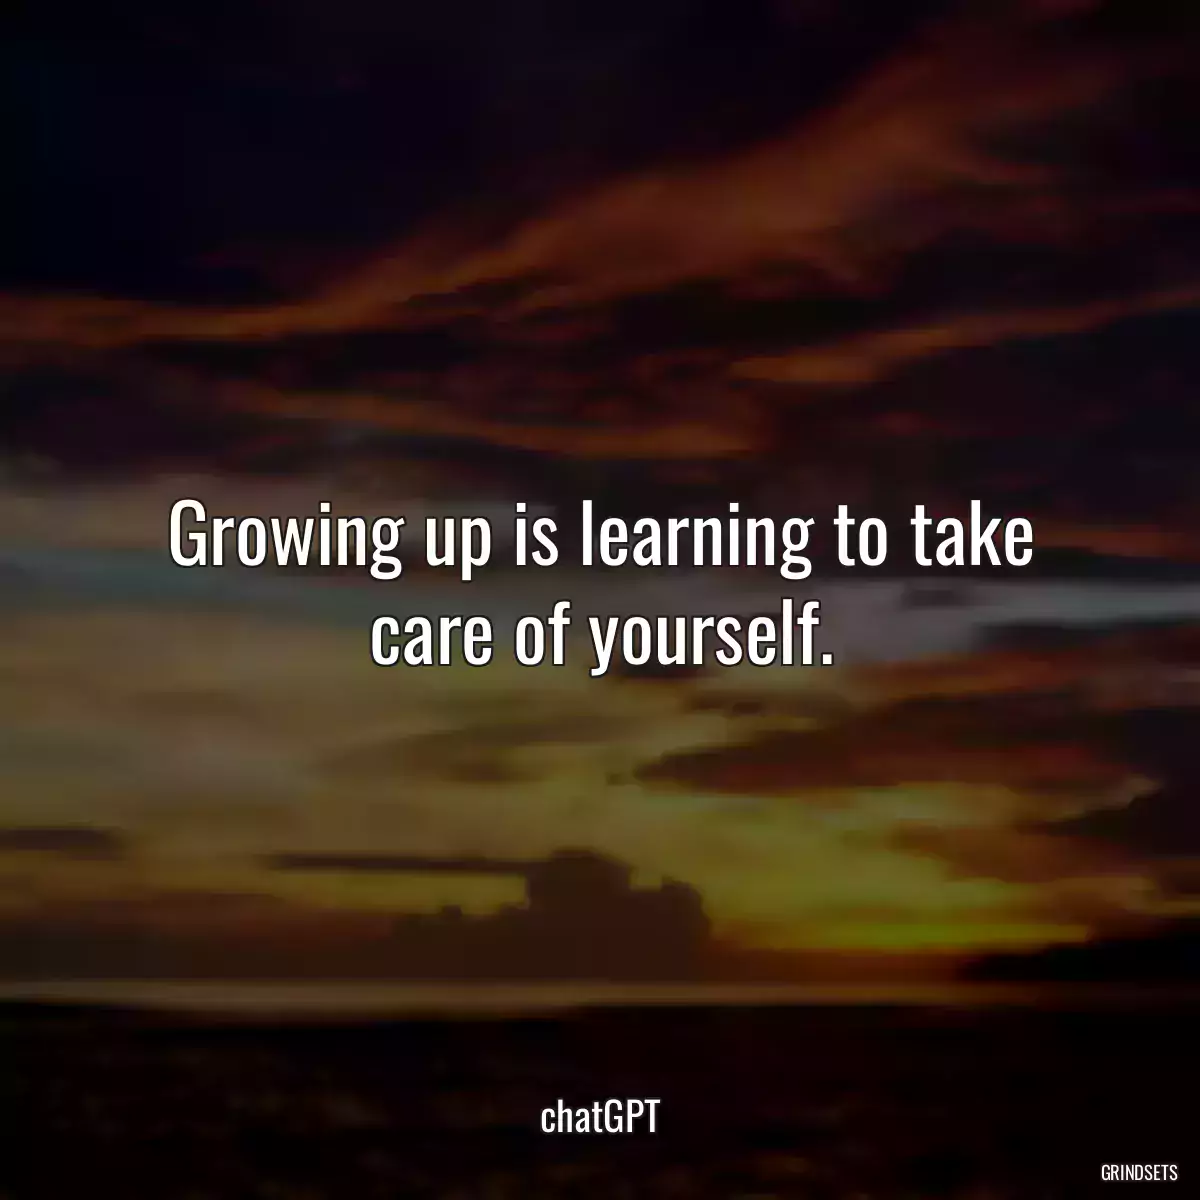 Growing up is learning to take care of yourself.